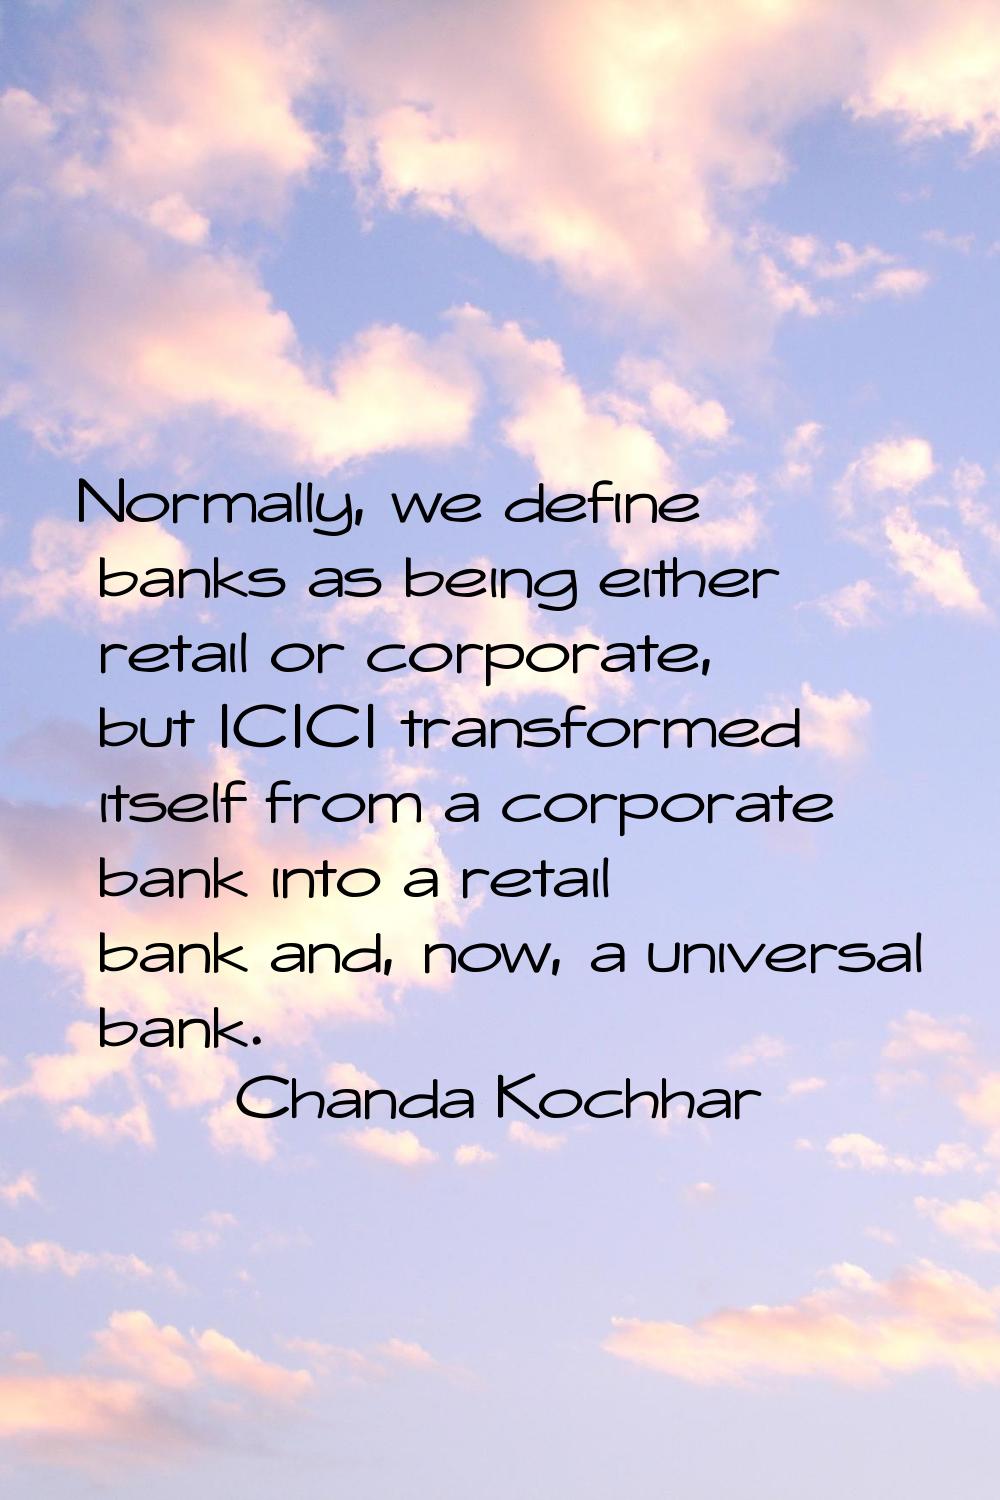 Normally, we define banks as being either retail or corporate, but ICICI transformed itself from a 